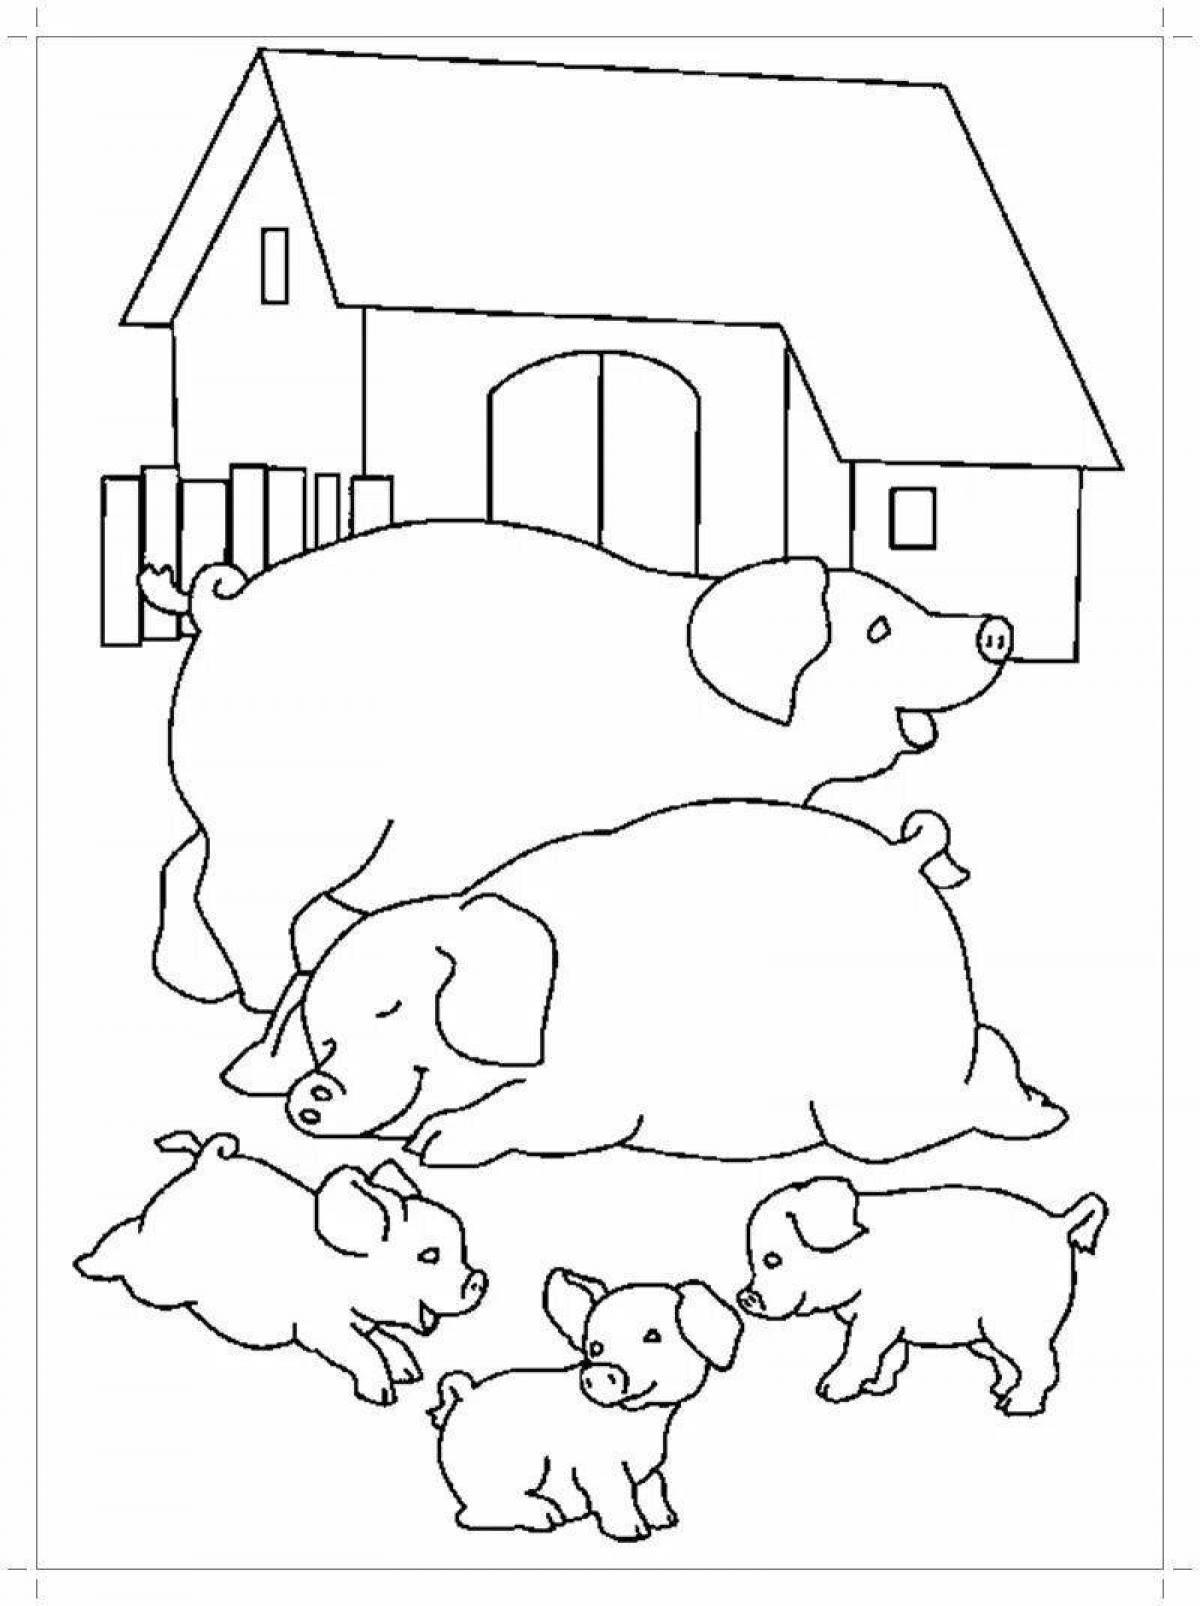 Awesome animal coloring book